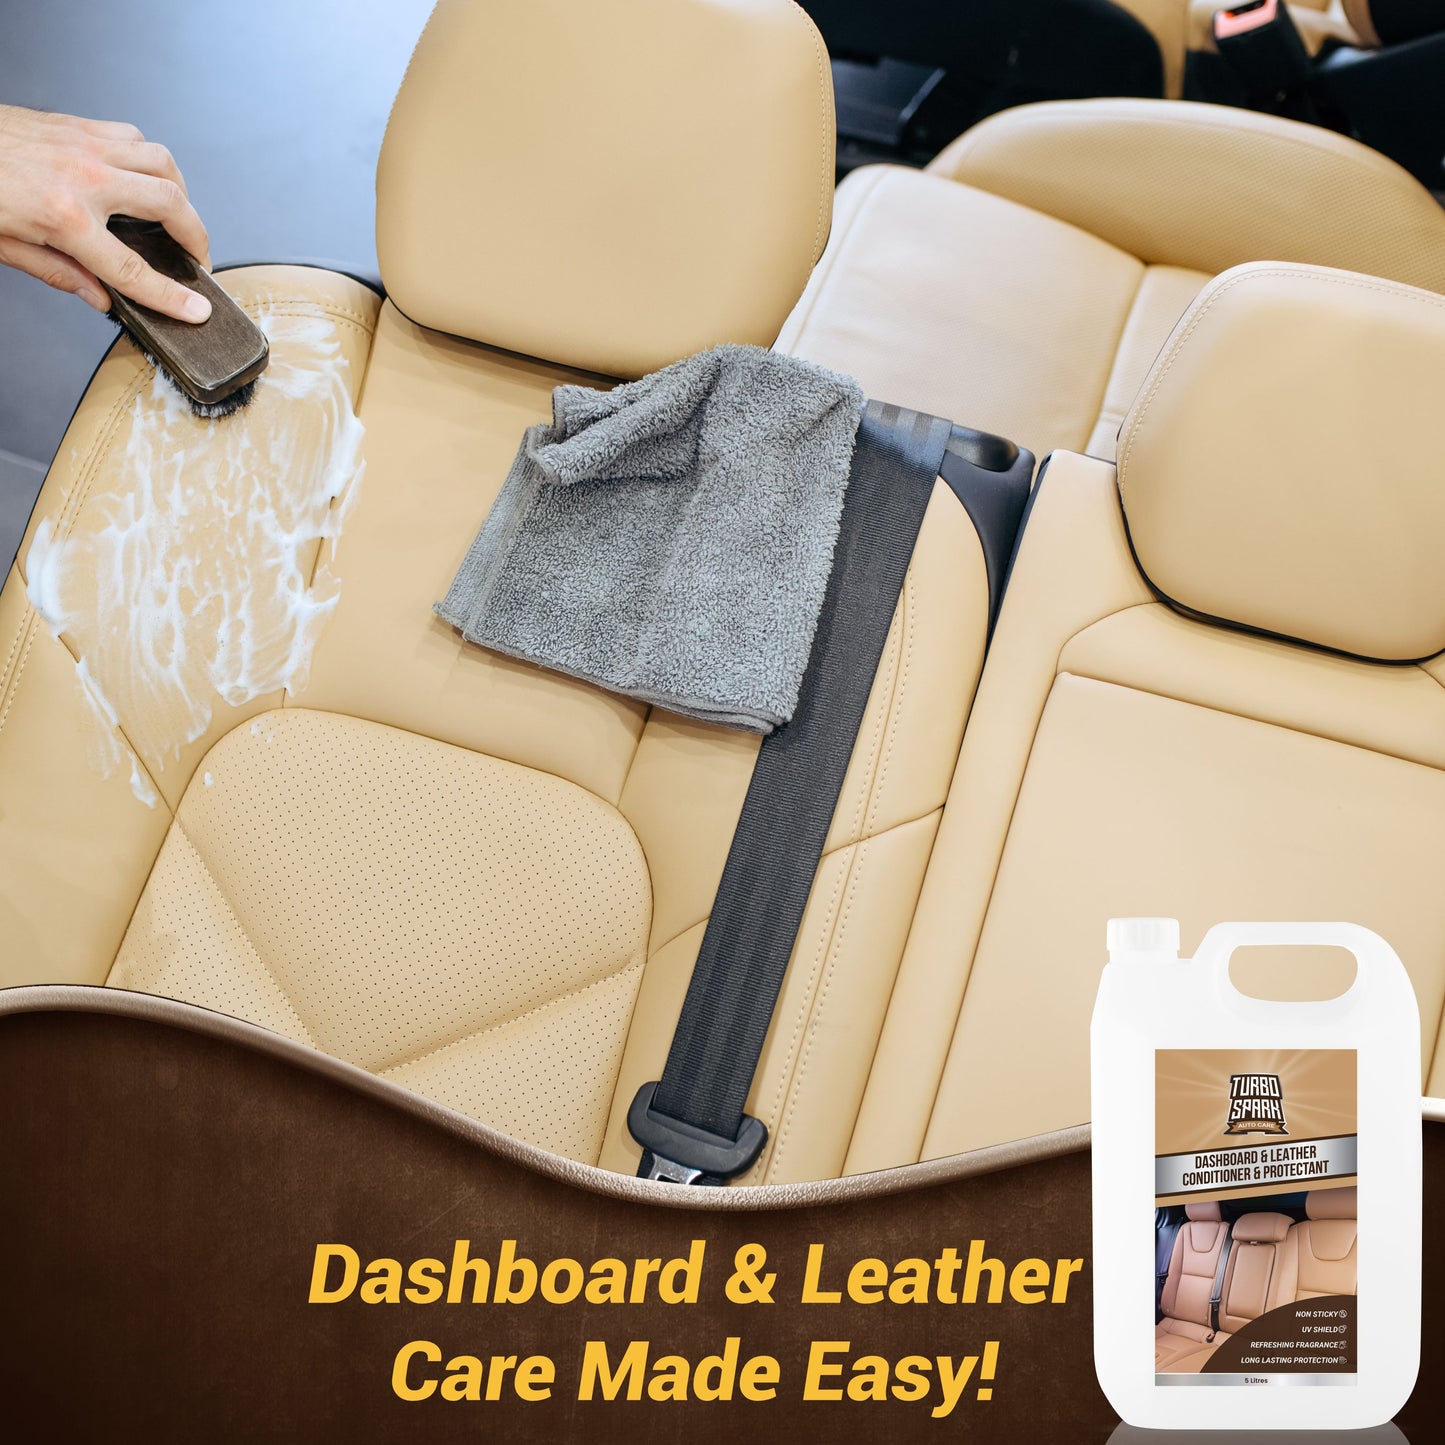 Turbo Spark Dashboard & Leather Conditioner